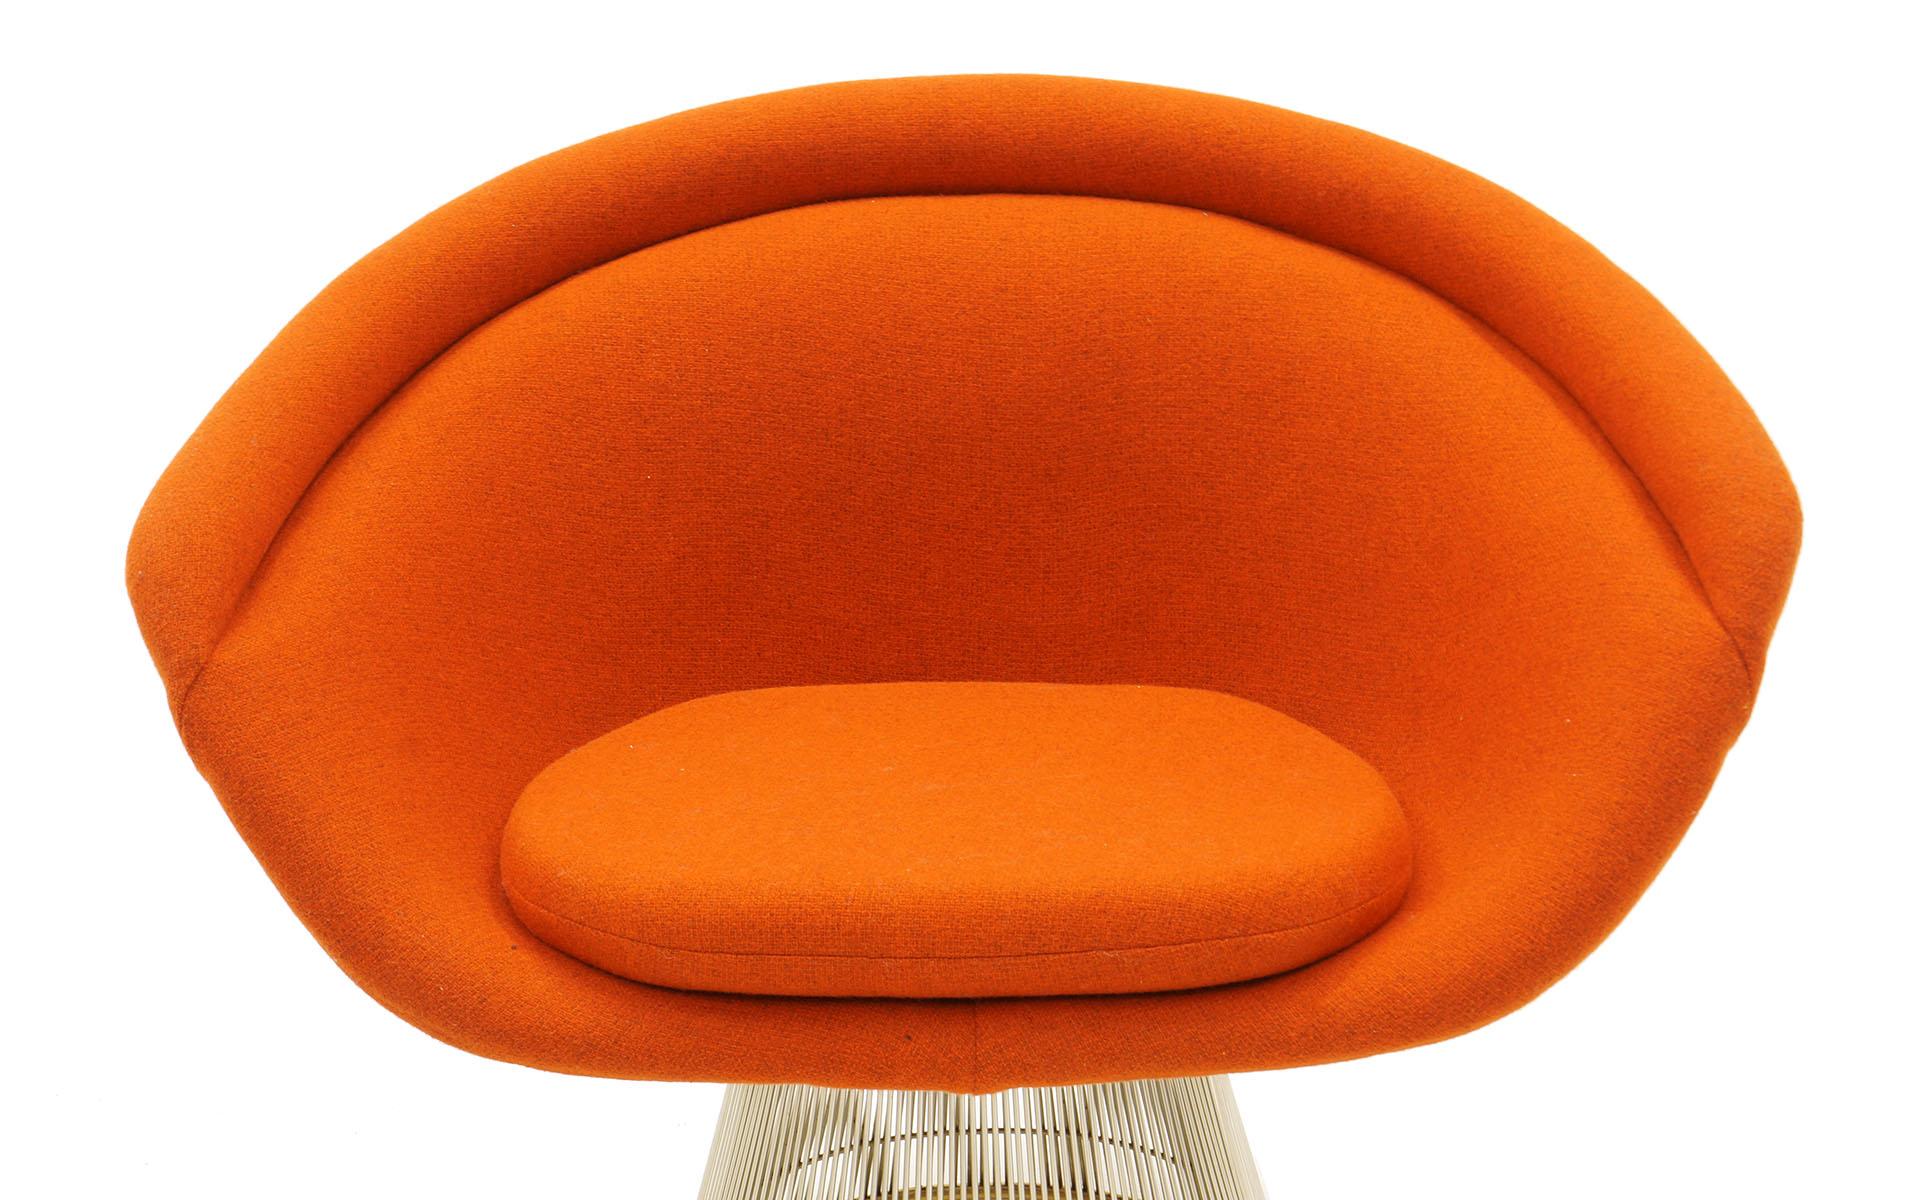 Upholstery Warren Platner Lounge Chairs for Knoll, Wire Frames, Orange Maharam Fabric, Pair